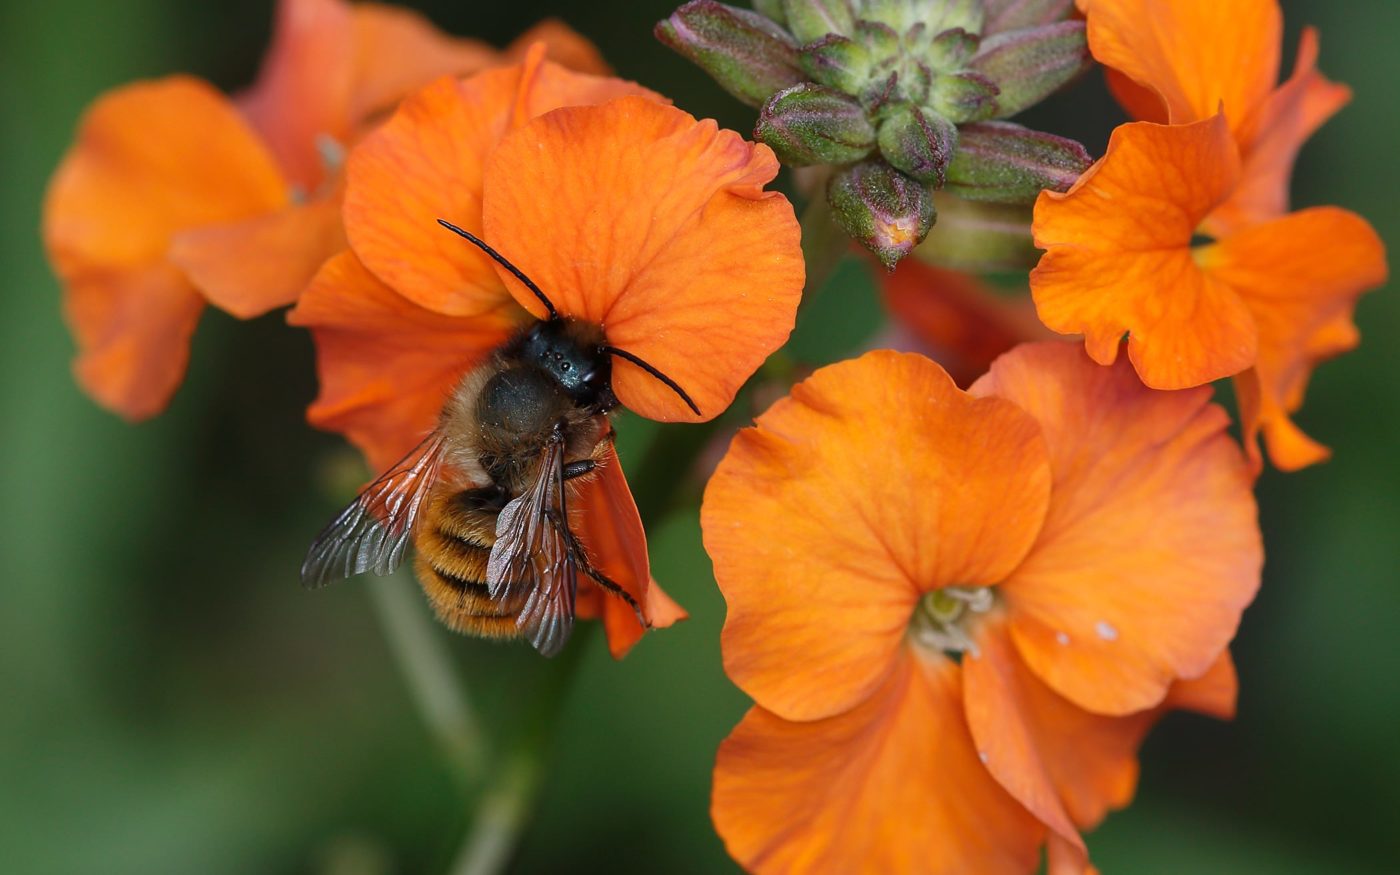 Red mason bee feeding on wallflower in the photographer’s garden in late May 2014. This was the first time that Brian Pearson had introduced red mason bees to his garden with the purchase of about a dozen pupae, which had all emerged successfully.